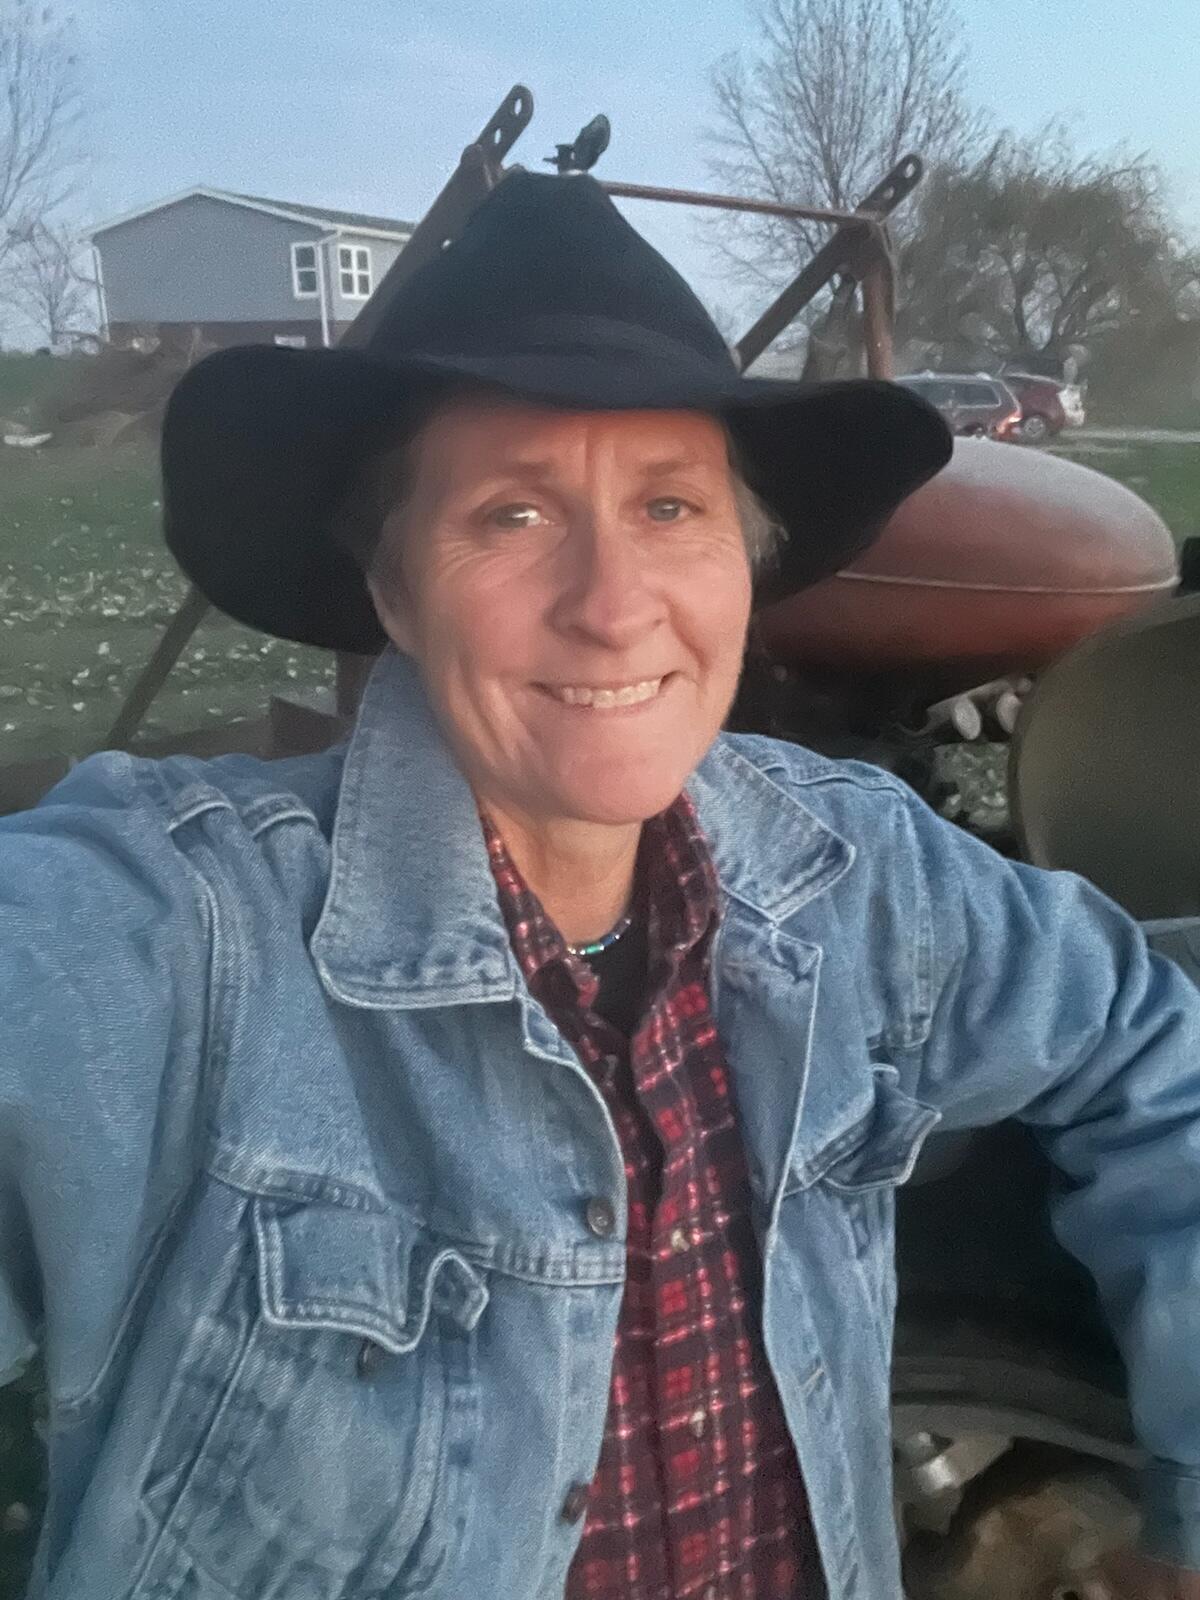 A woman in a red plaid shirt, denim jacket and black hat, pictured with farm equipment on land with a house in the distance